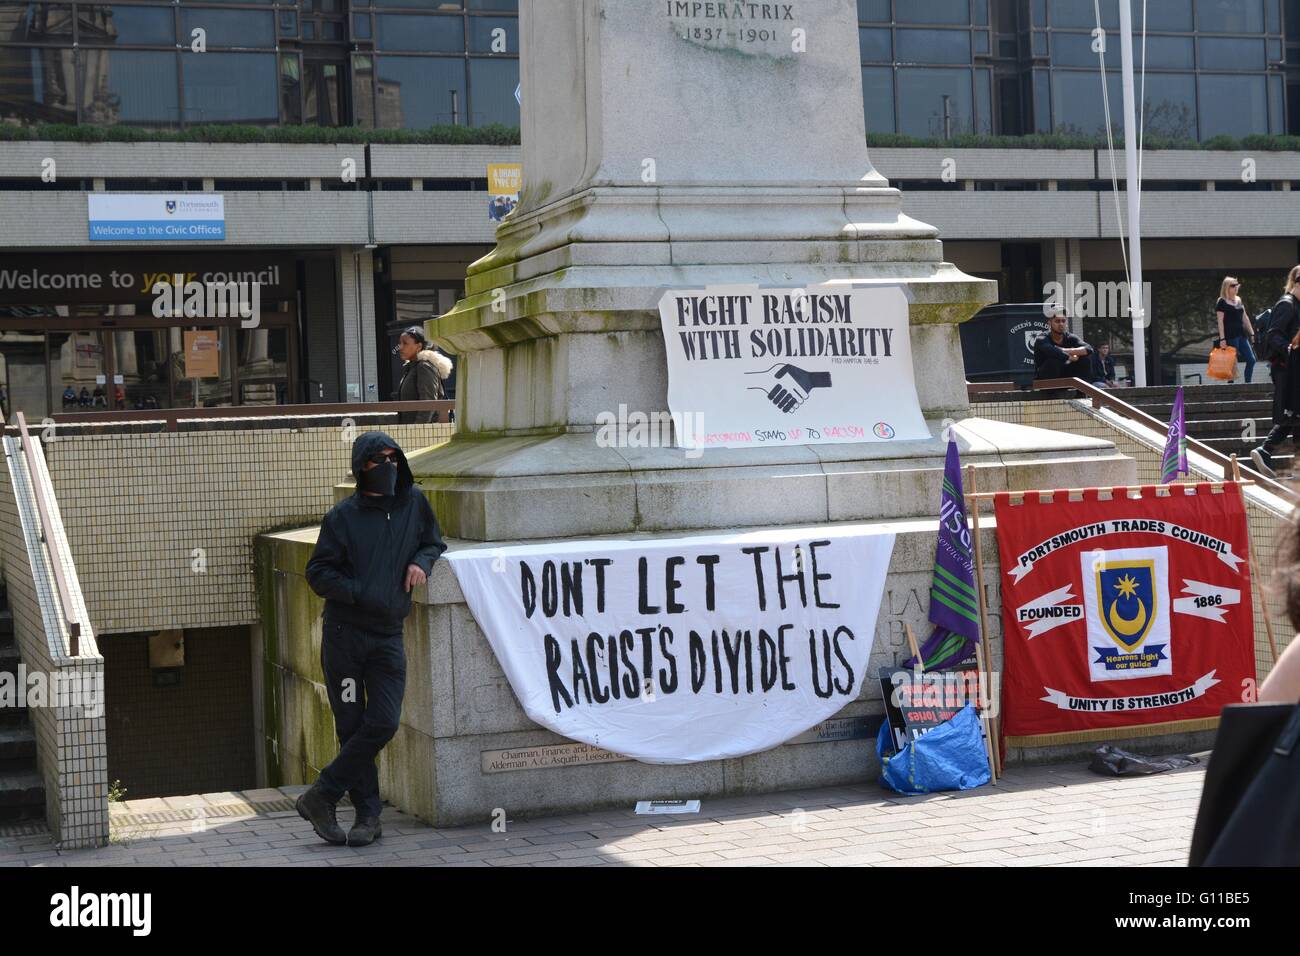 Portsmouth, UK. 7th May 2016. Anti-fascist protester stands in the shade on a gloriously sunny day. Credit: Marc Ward/Alamy Live News Stock Photo